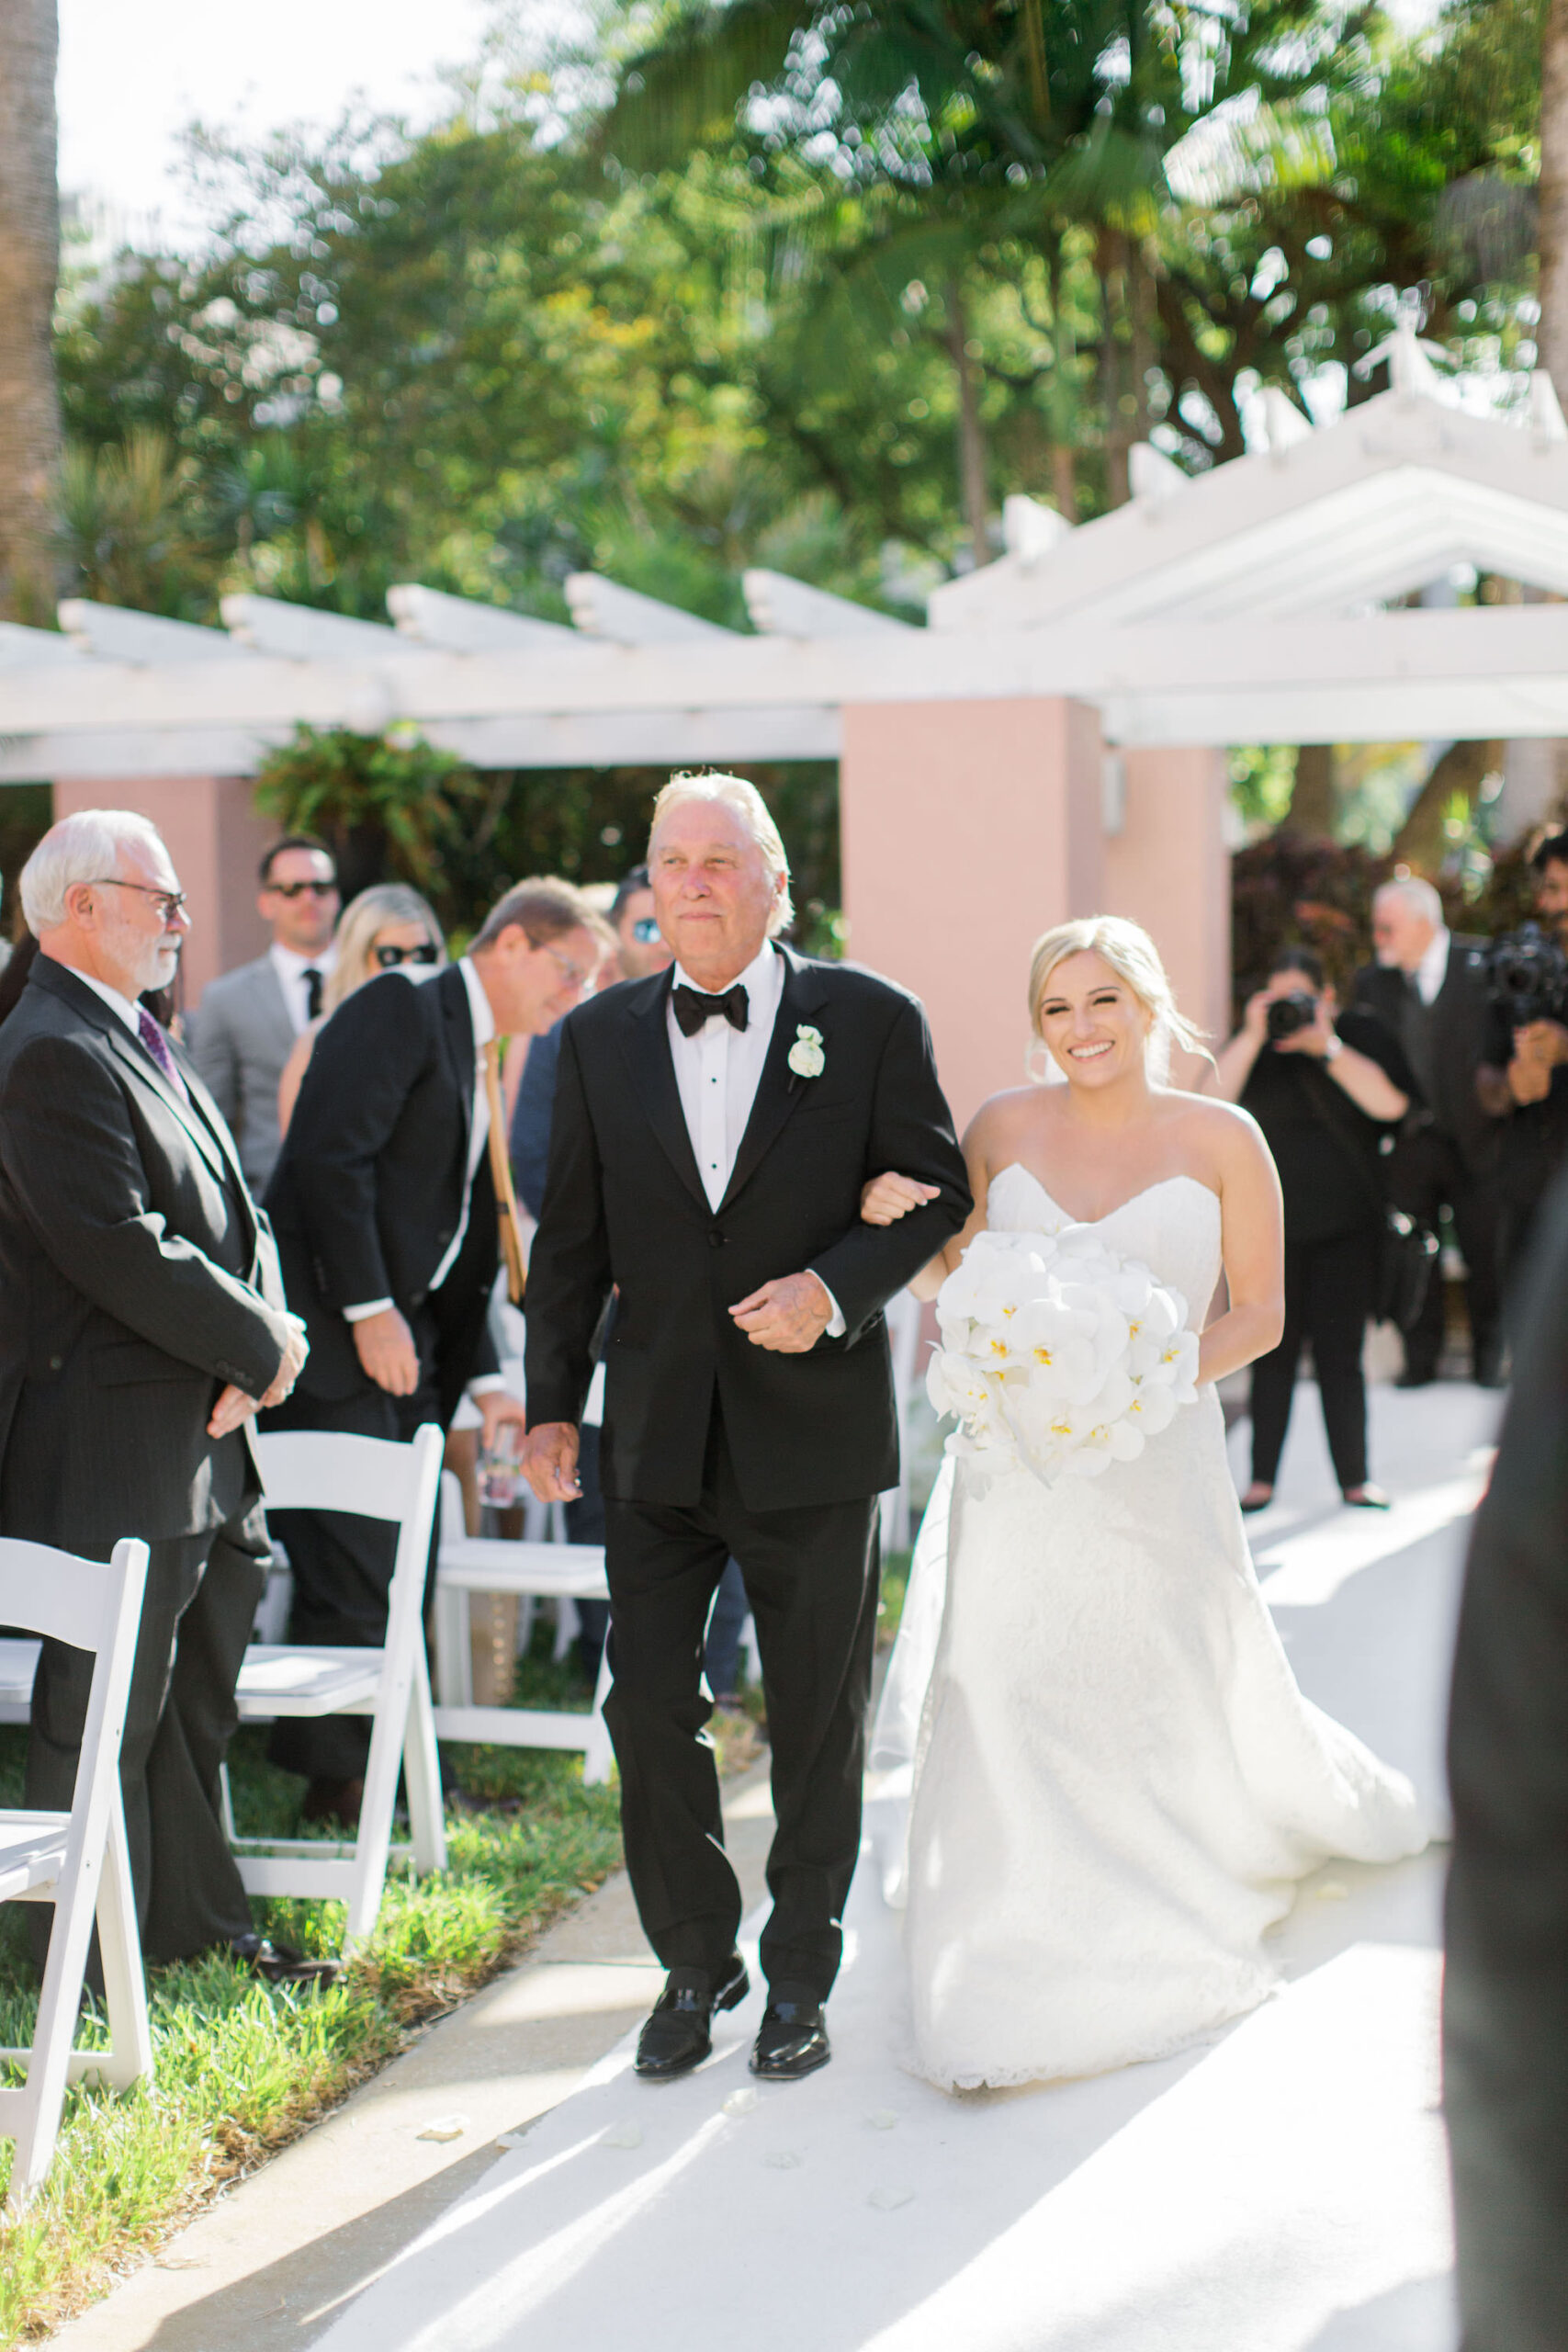 Timeless Classic Wedding Ceremony, Bride Walking Down the Aisle with Father Holding White Orchid Floral Bouquet | Tampa Bay Wedding Florist Bruce Wayne Florals